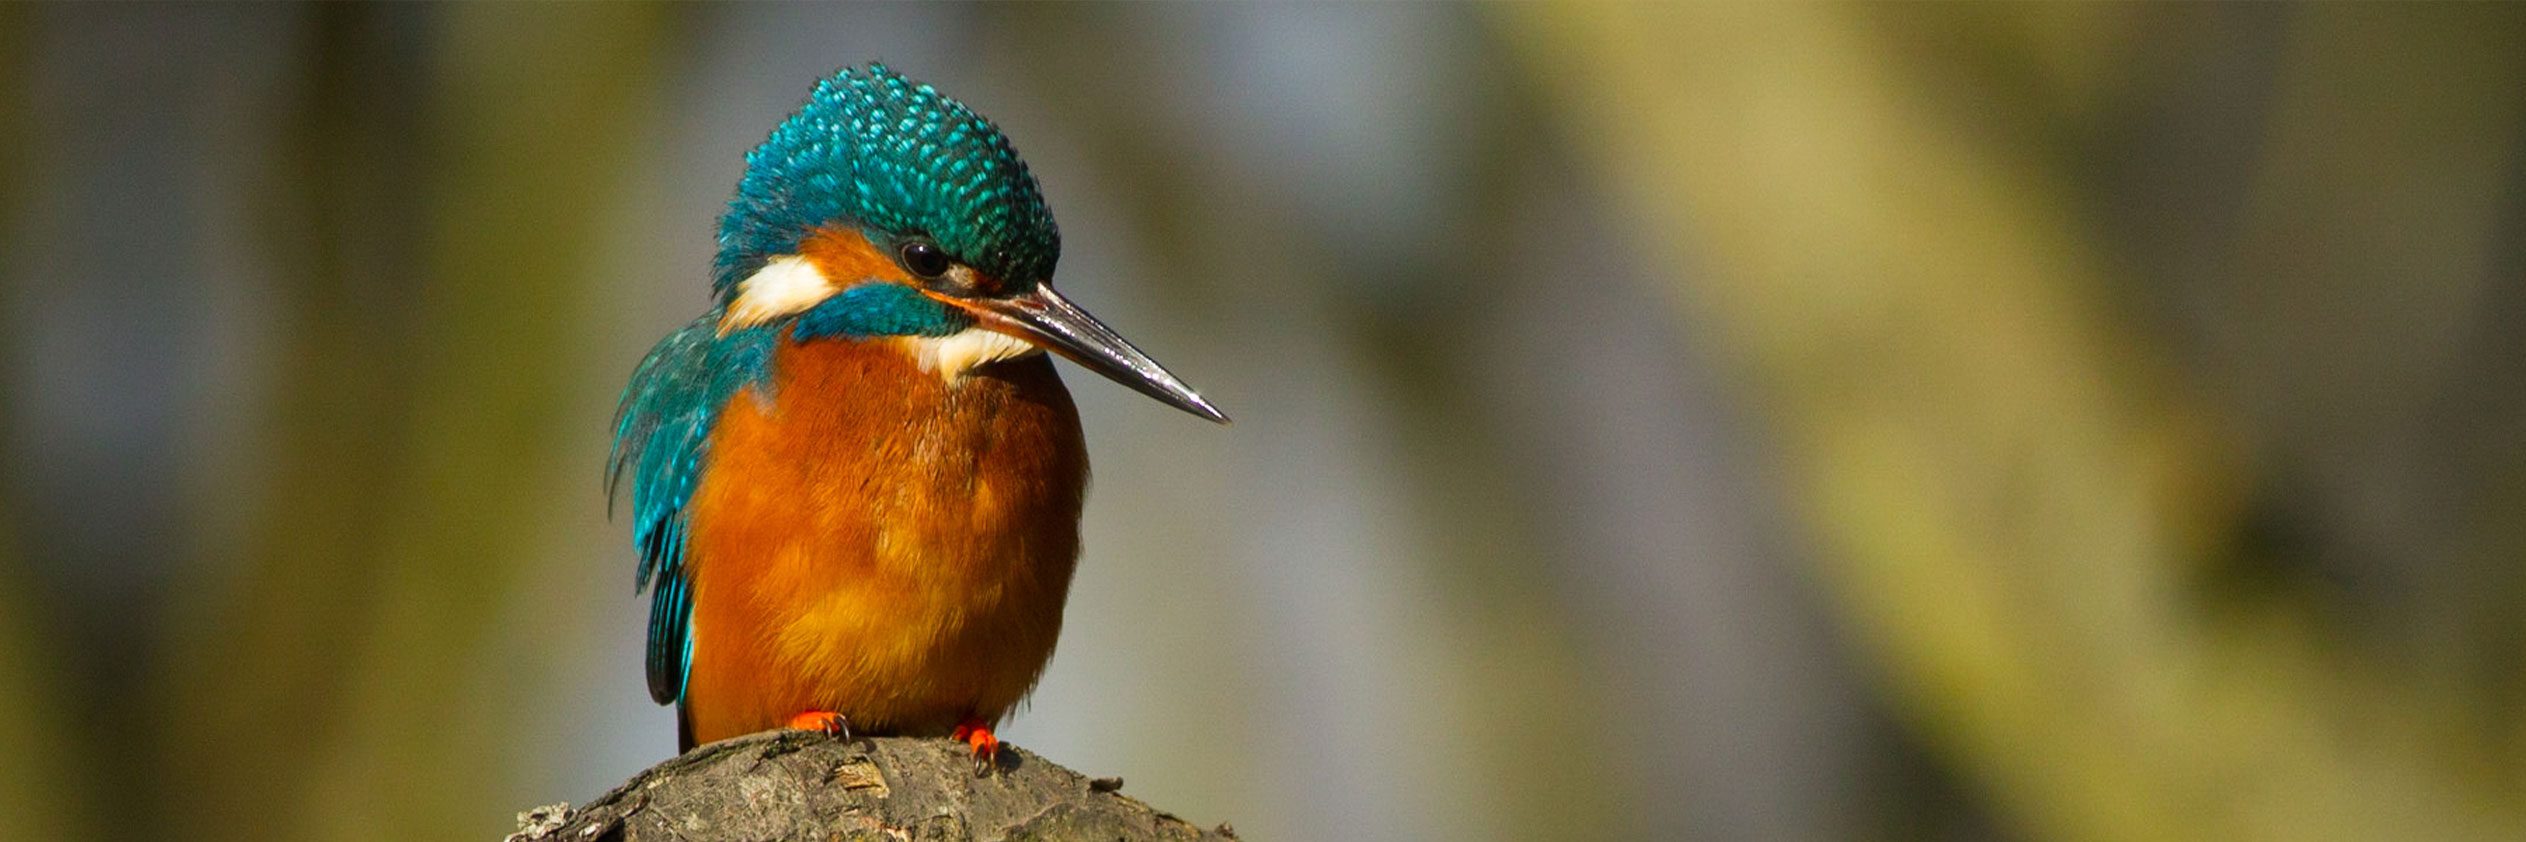 ALL ABOUT KINGFISHERS AND HOW TO SEE THEM